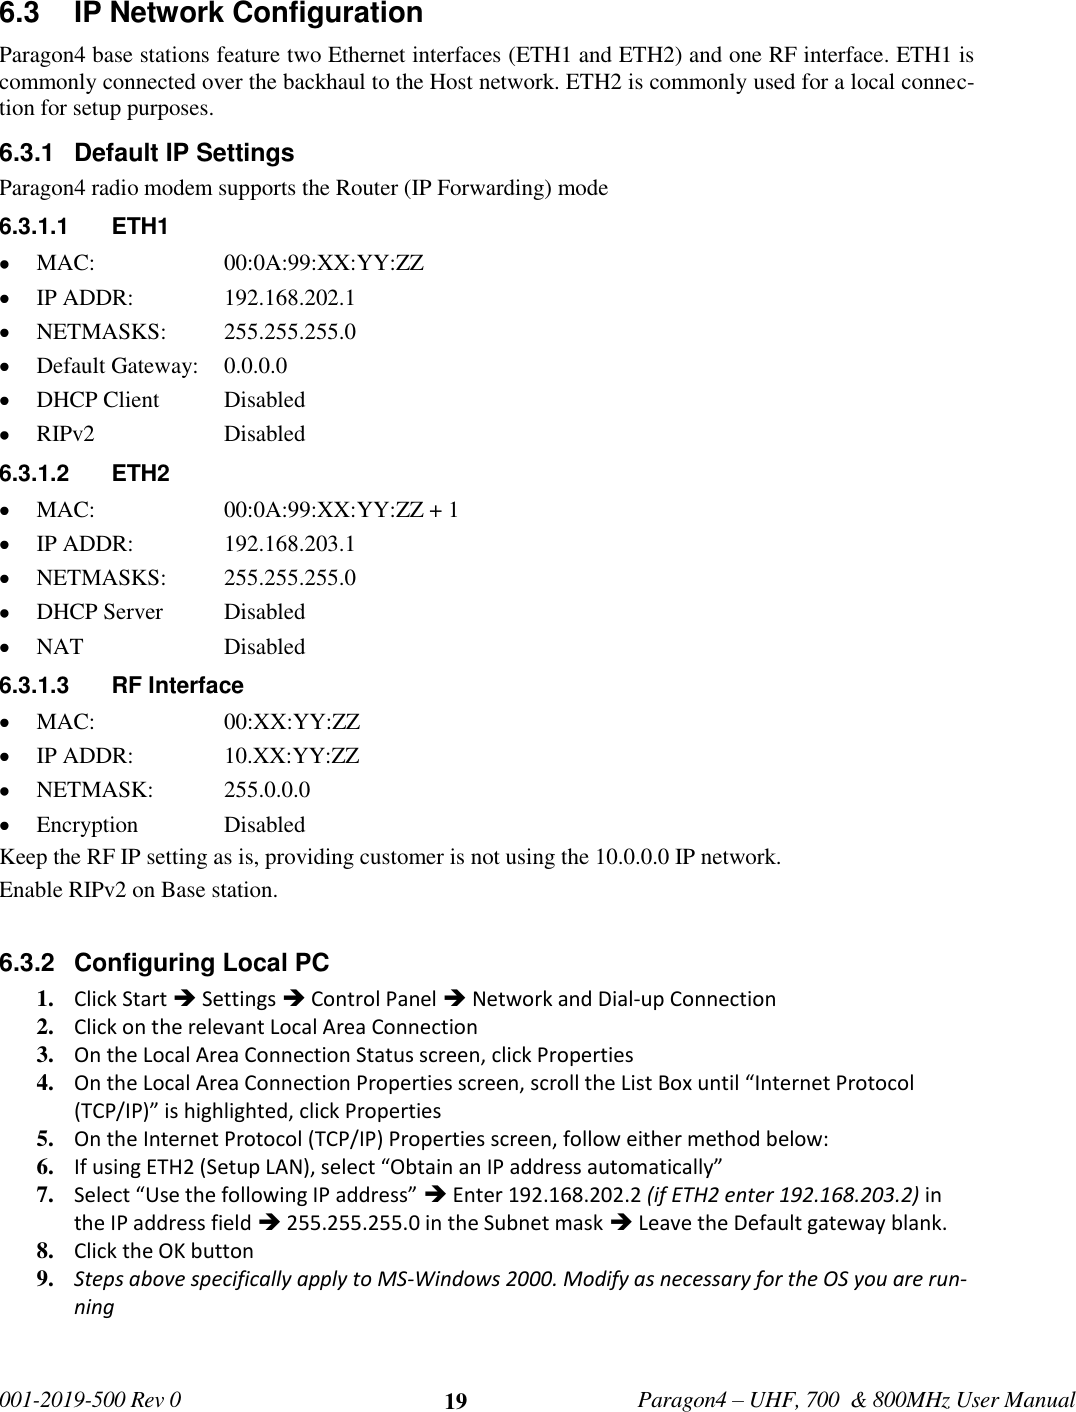   001-2019-500 Rev 0         Paragon4 – UHF, 700  &amp; 800MHz User Manual     19 6.3  IP Network Configuration Paragon4 base stations feature two Ethernet interfaces (ETH1 and ETH2) and one RF interface. ETH1 is commonly connected over the backhaul to the Host network. ETH2 is commonly used for a local connec-tion for setup purposes. 6.3.1  Default IP Settings Paragon4 radio modem supports the Router (IP Forwarding) mode 6.3.1.1  ETH1  MAC:     00:0A:99:XX:YY:ZZ  IP ADDR:     192.168.202.1  NETMASKS:   255.255.255.0  Default Gateway:   0.0.0.0  DHCP Client  Disabled  RIPv2    Disabled 6.3.1.2  ETH2  MAC:     00:0A:99:XX:YY:ZZ + 1  IP ADDR:     192.168.203.1  NETMASKS:   255.255.255.0  DHCP Server  Disabled  NAT    Disabled 6.3.1.3  RF Interface  MAC:     00:XX:YY:ZZ  IP ADDR:     10.XX:YY:ZZ  NETMASK:   255.0.0.0  Encryption    Disabled Keep the RF IP setting as is, providing customer is not using the 10.0.0.0 IP network. Enable RIPv2 on Base station.  6.3.2  Configuring Local PC 1. Click Start  Settings  Control Panel  Network and Dial-up Connection 2. Click on the relevant Local Area Connection 3. On the Local Area Connection Status screen, click Properties 4. On the Local Area Connection Properties screen, scroll the List Box until “Internet Protocol (TCP/IP)” is highlighted, click Properties 5. On the Internet Protocol (TCP/IP) Properties screen, follow either method below: 6. If using ETH2 (Setup LAN), select “Obtain an IP address automatically”  7. Select “Use the following IP address”  Enter 192.168.202.2 (if ETH2 enter 192.168.203.2) in the IP address field  255.255.255.0 in the Subnet mask  Leave the Default gateway blank. 8. Click the OK button 9. Steps above specifically apply to MS-Windows 2000. Modify as necessary for the OS you are run-ning   